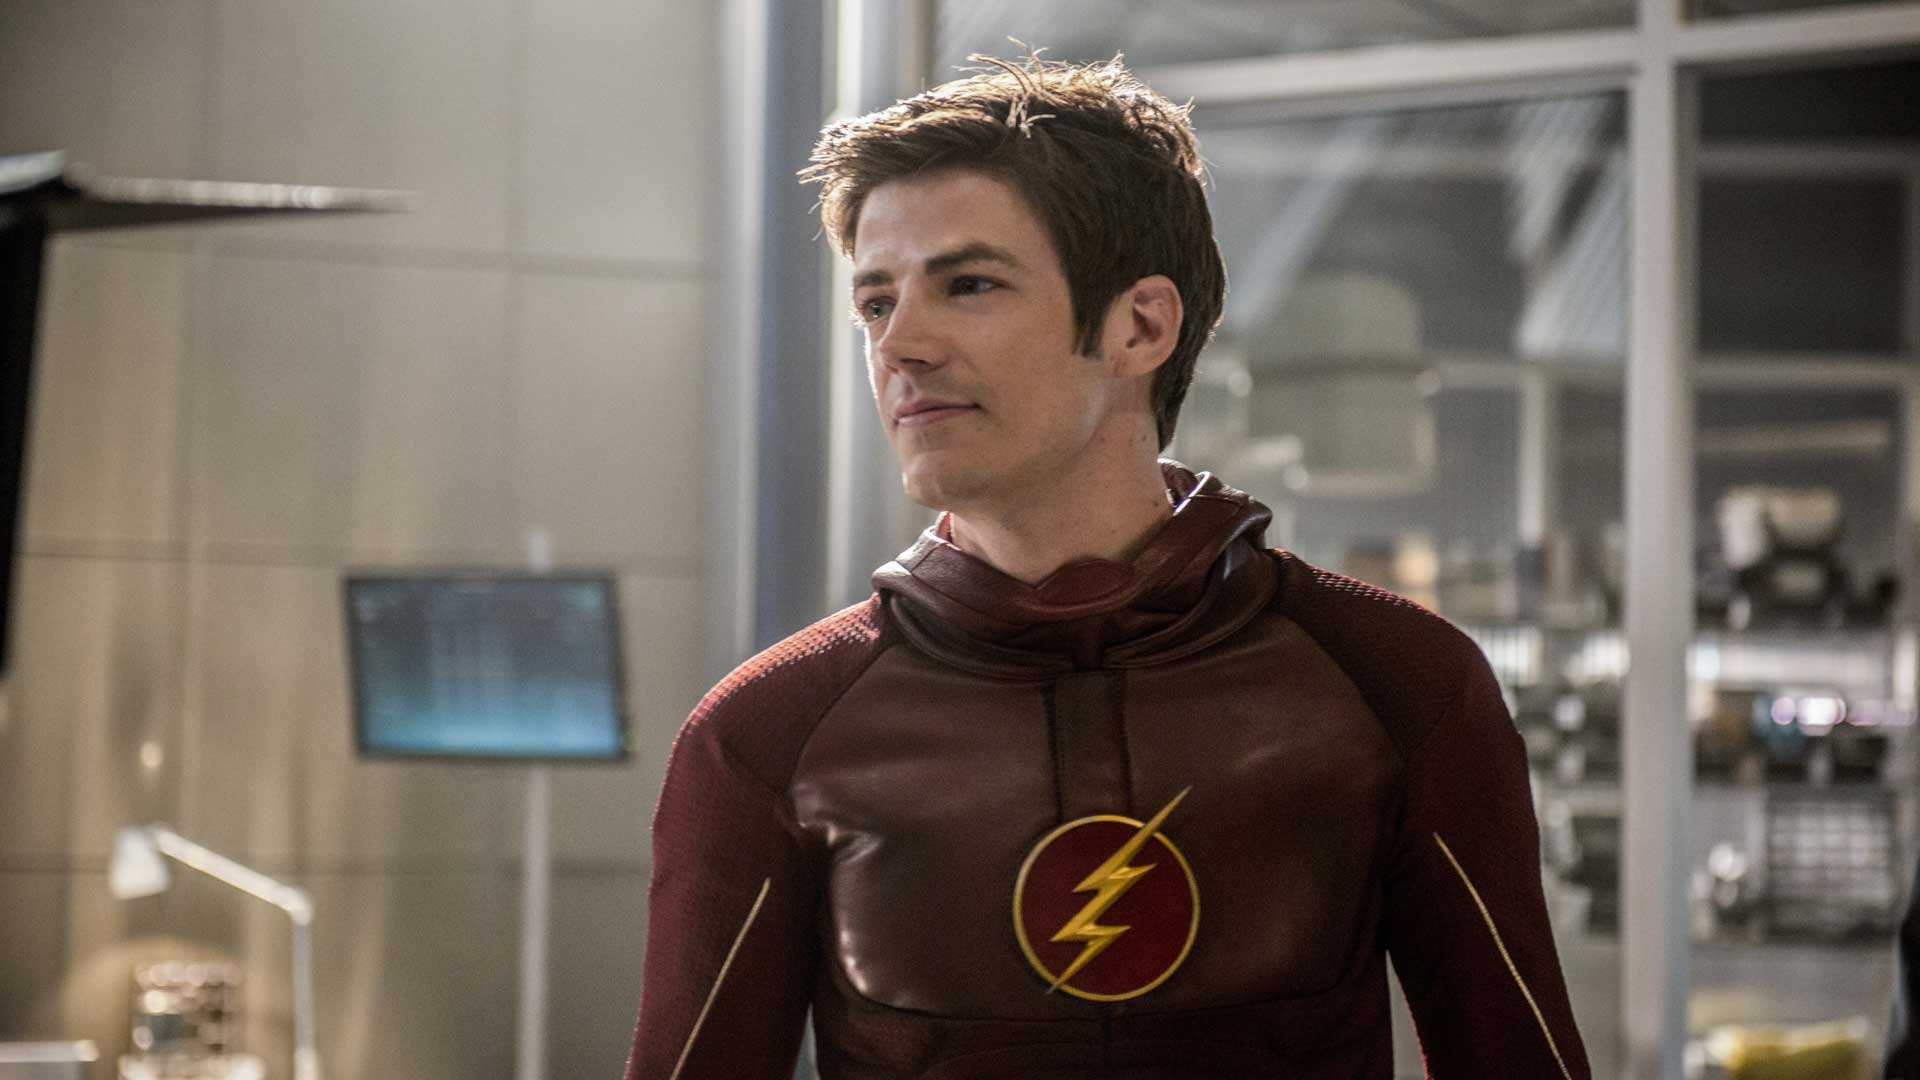 The Flash Hd Wallpaper - Grant Gustin On The Flash , HD Wallpaper & Backgrounds